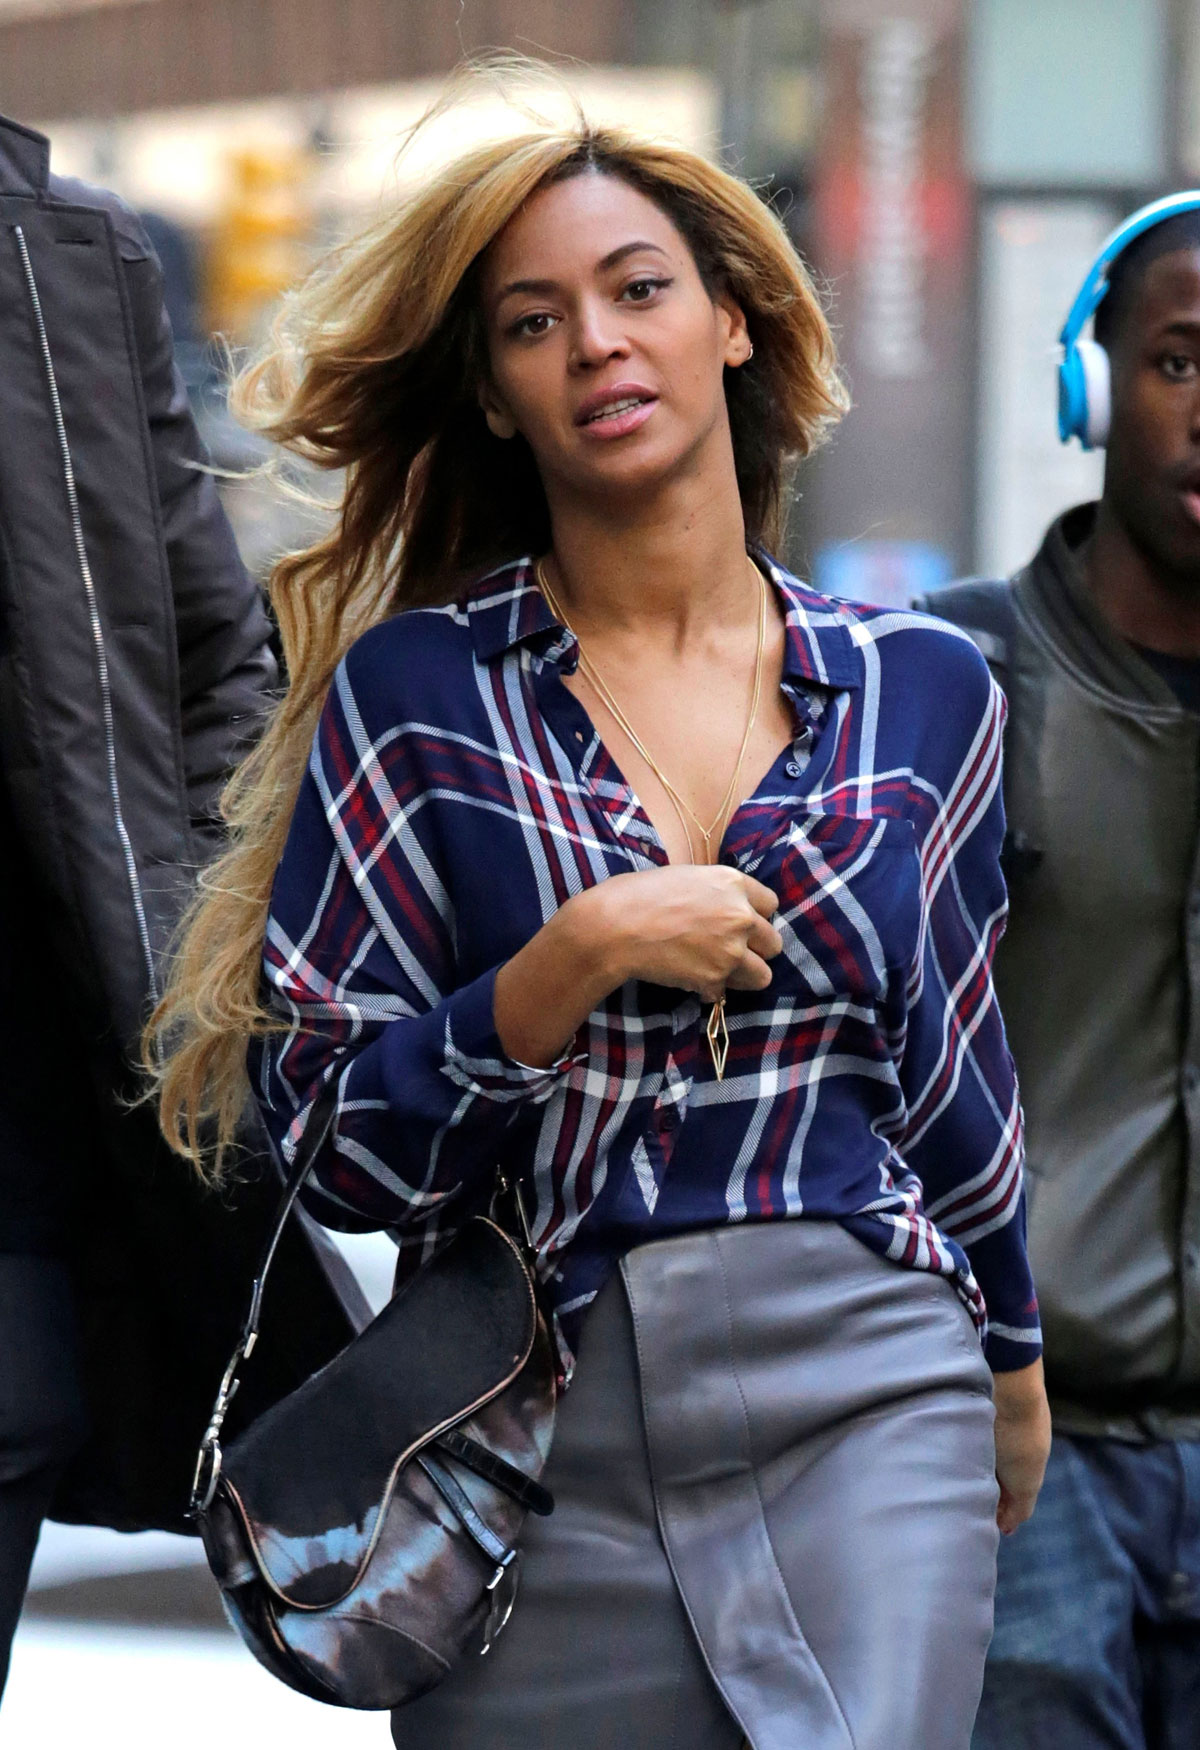 Beyonce out & about in NYC